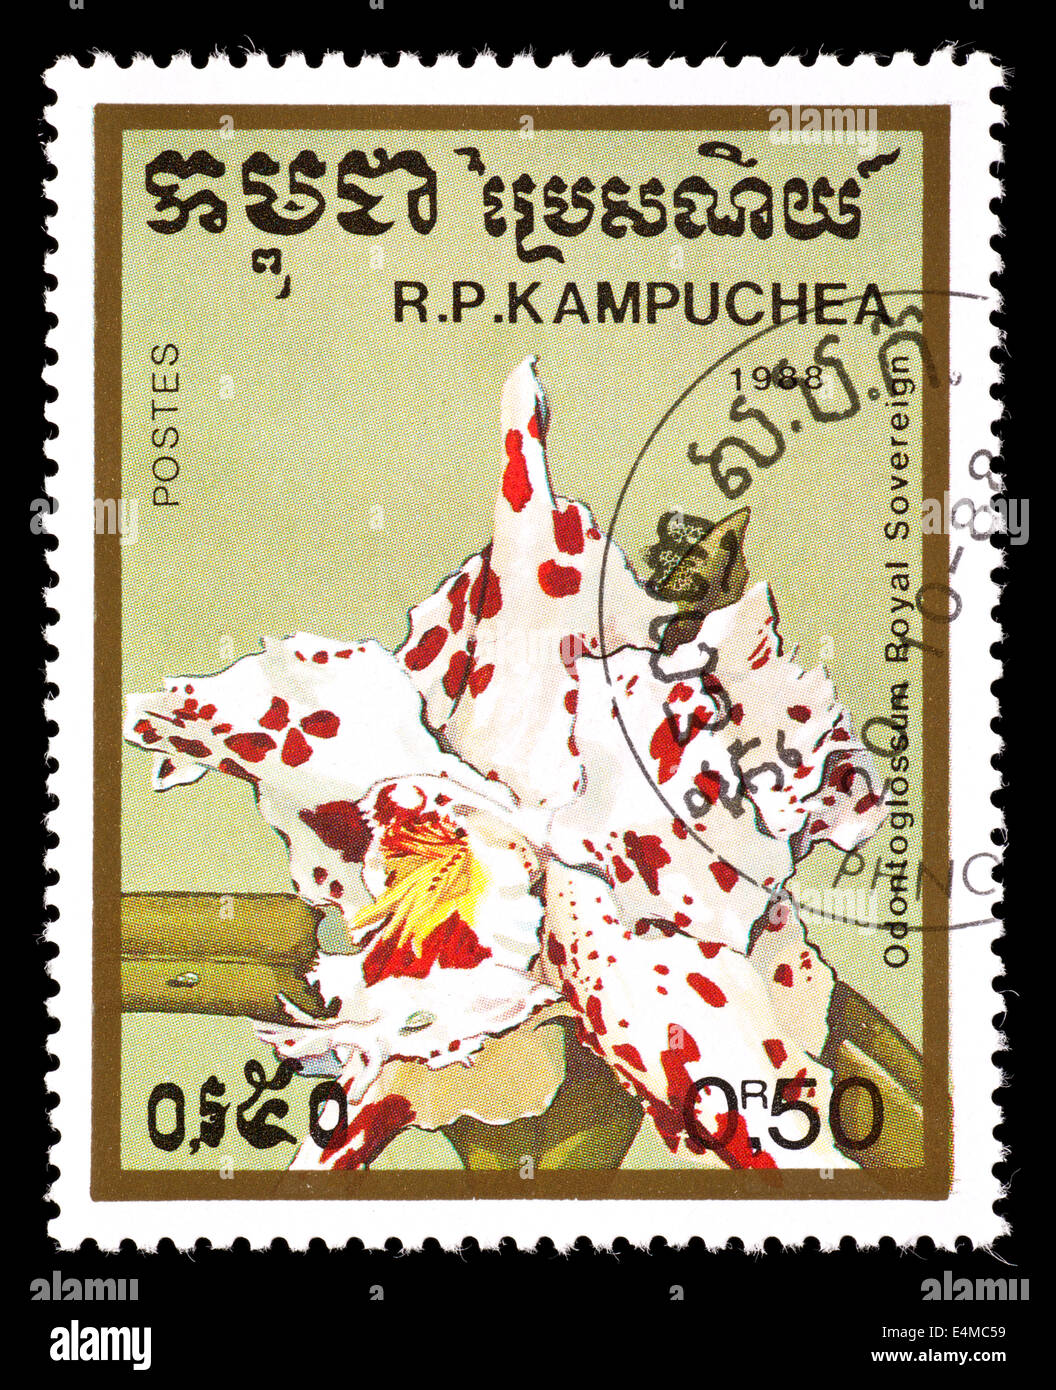 Postage stamp from Cambodia depicting the Odontoglossum orchid variety Royal Sovereign. Stock Photo